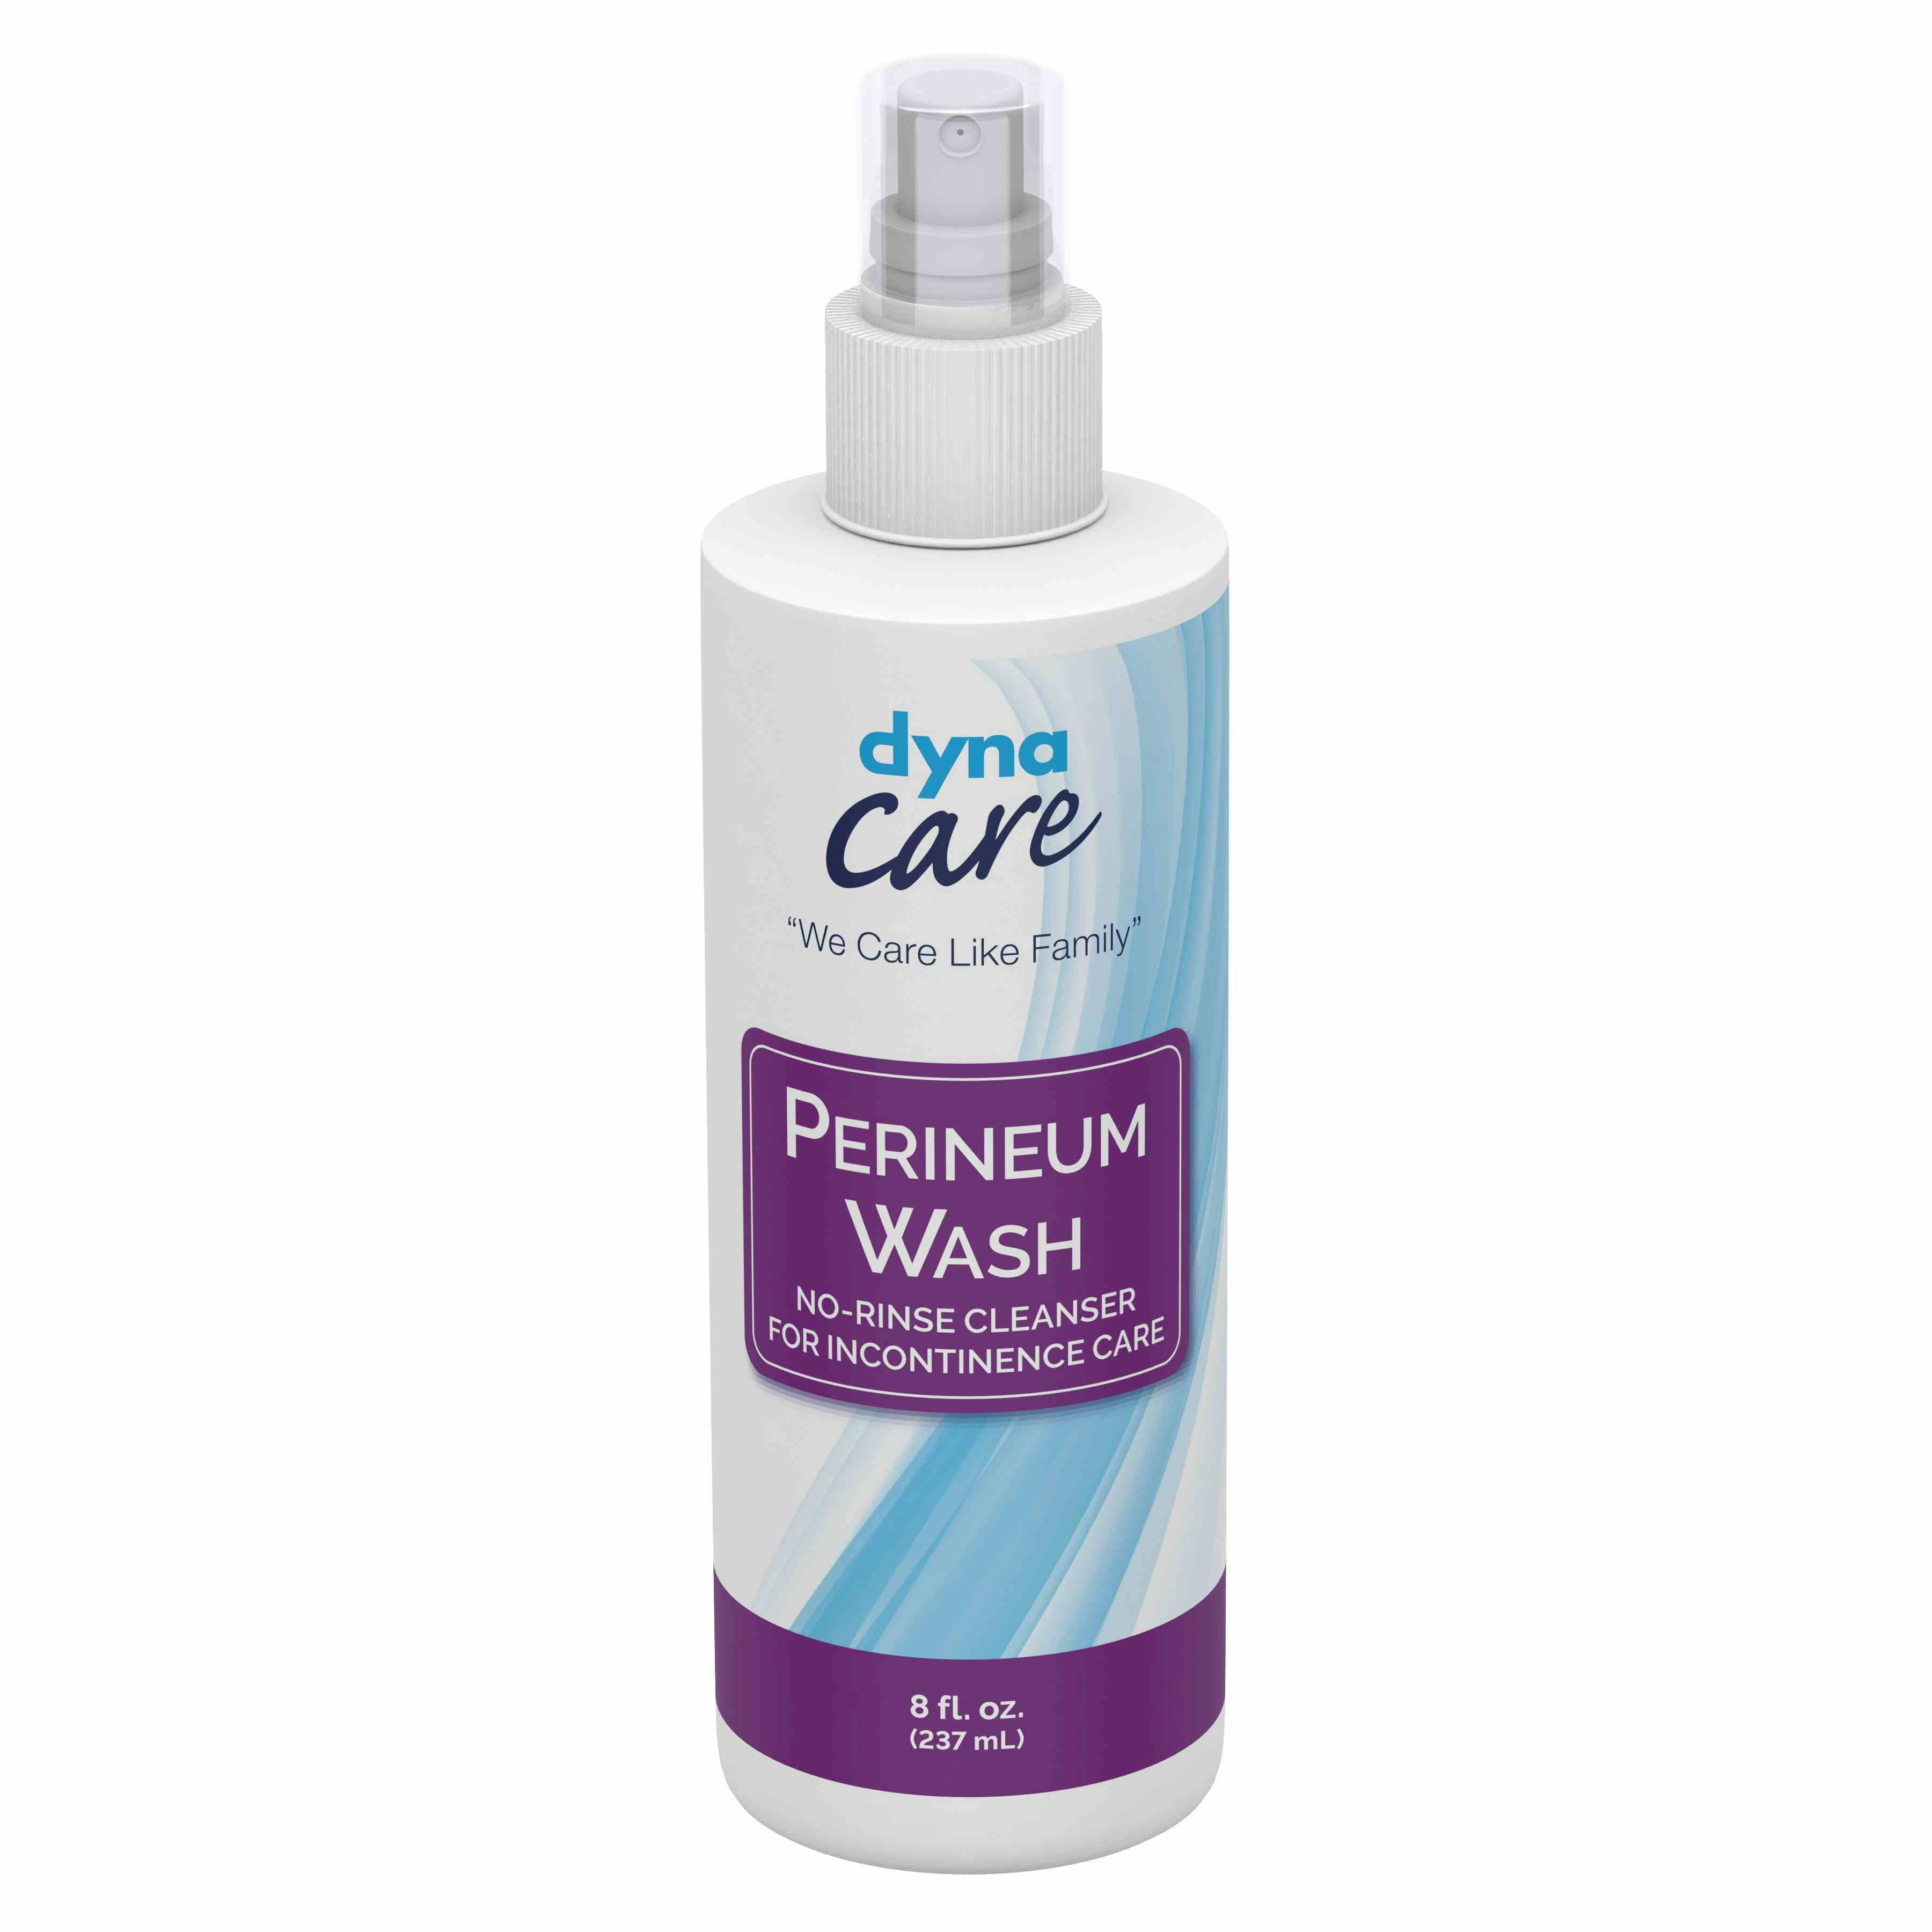 DynaCare Perineum Wash, 4850, Case of 48